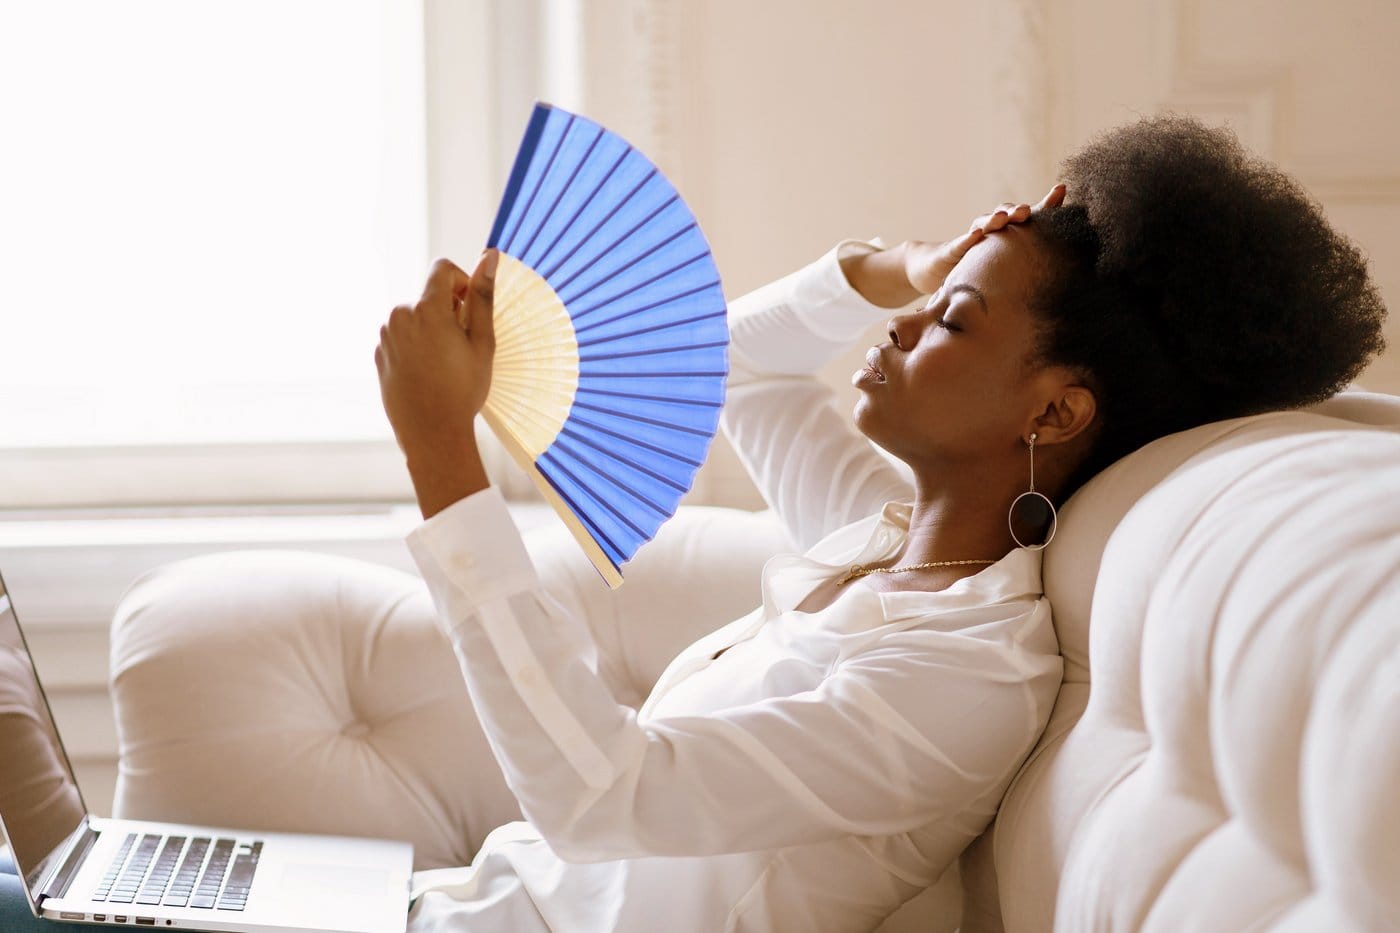 Woman fanning herself on a hot day